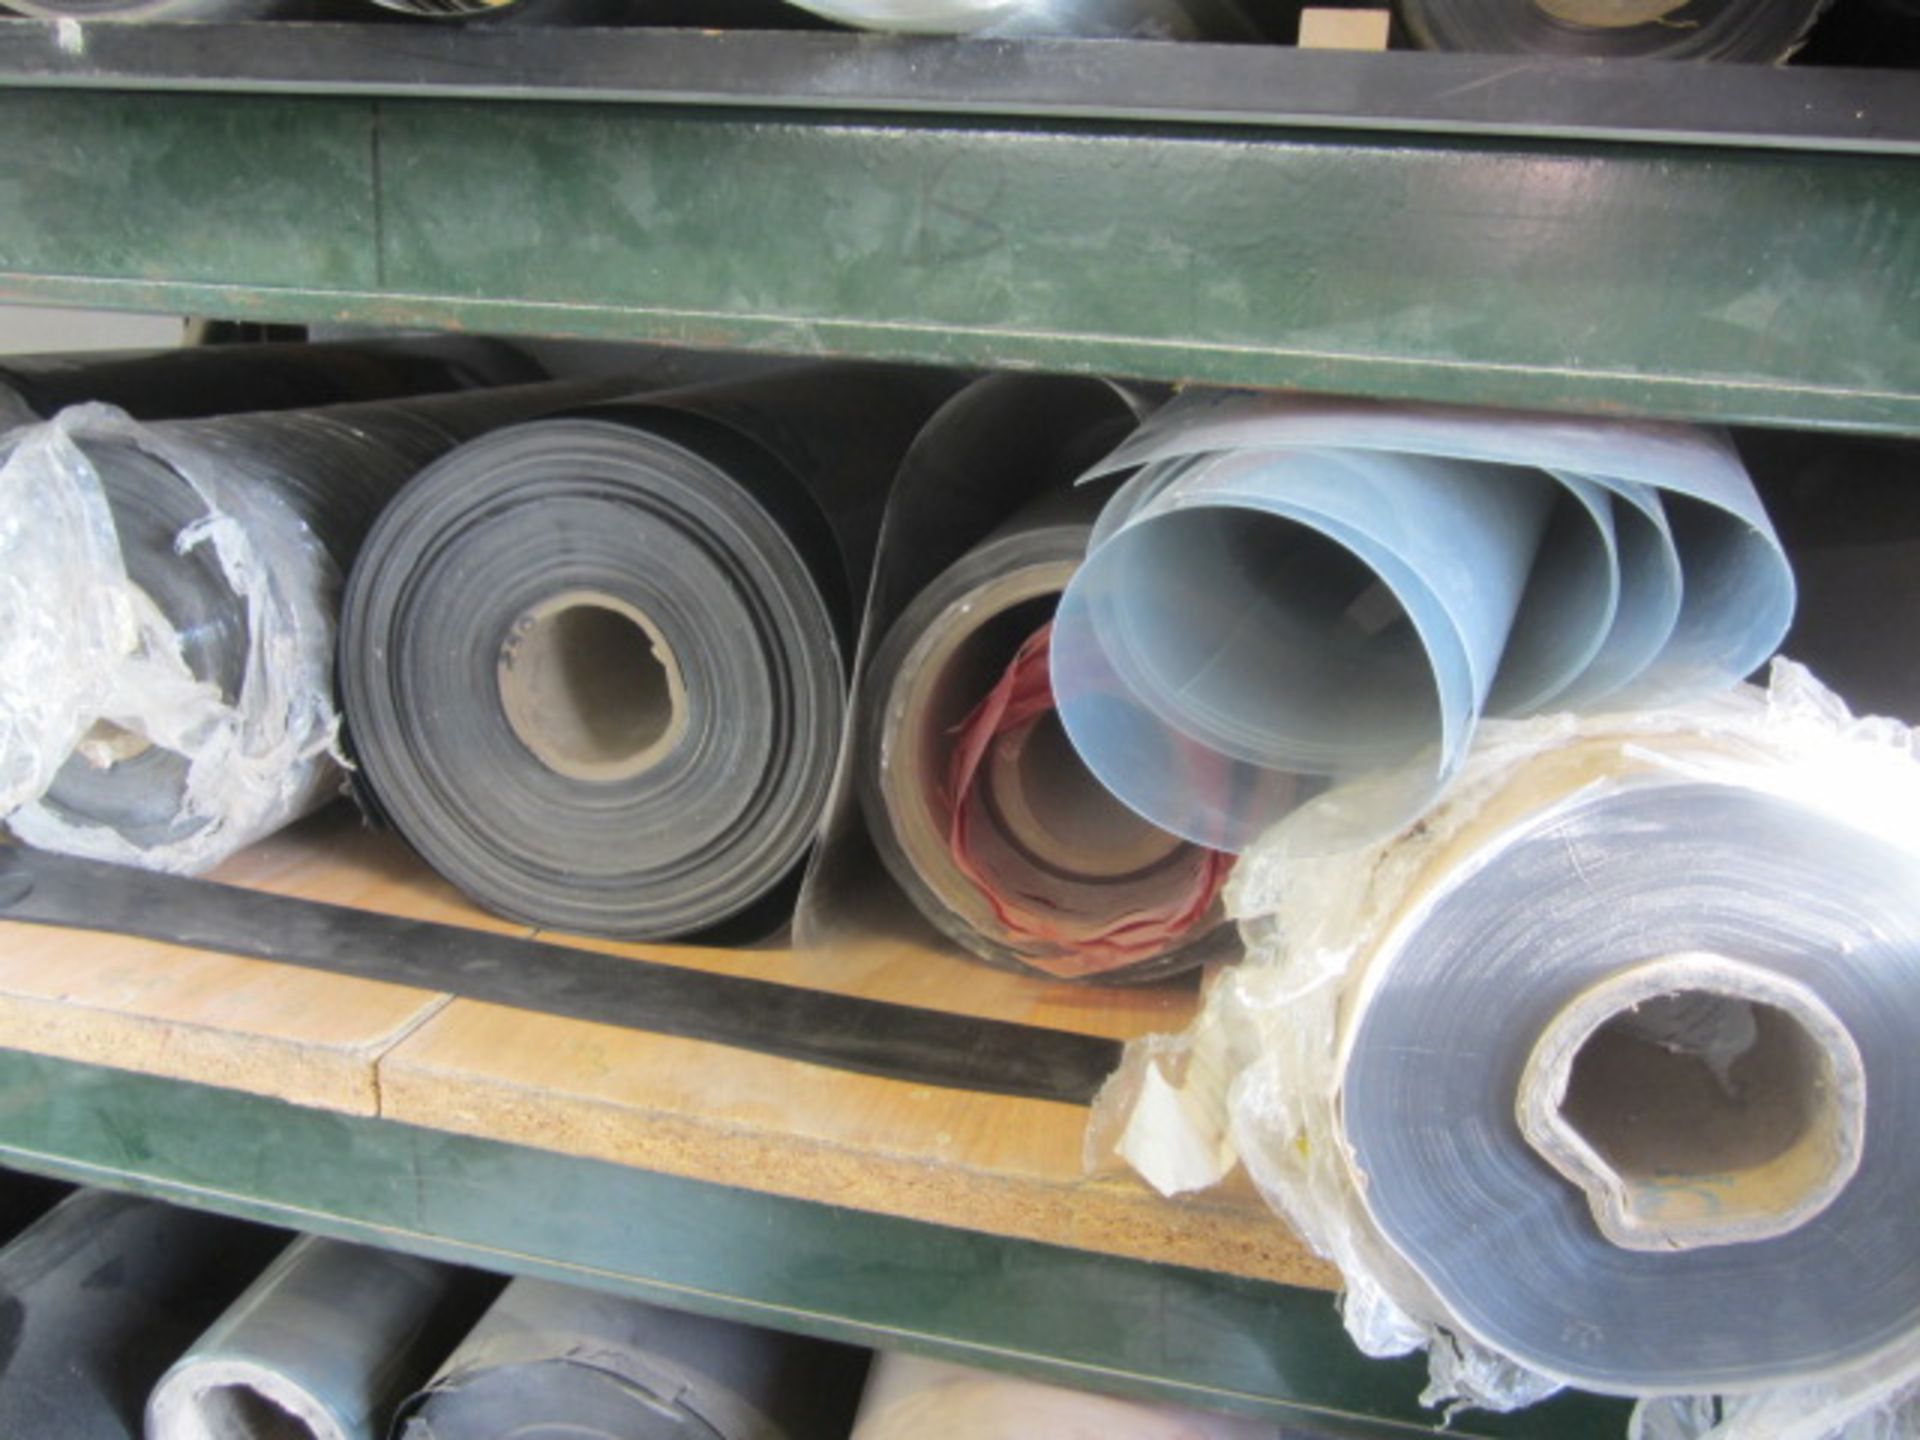 Assorted part reels of Apet film stock, approx. 85 - excluding racking. Located at Supreme - Image 9 of 12